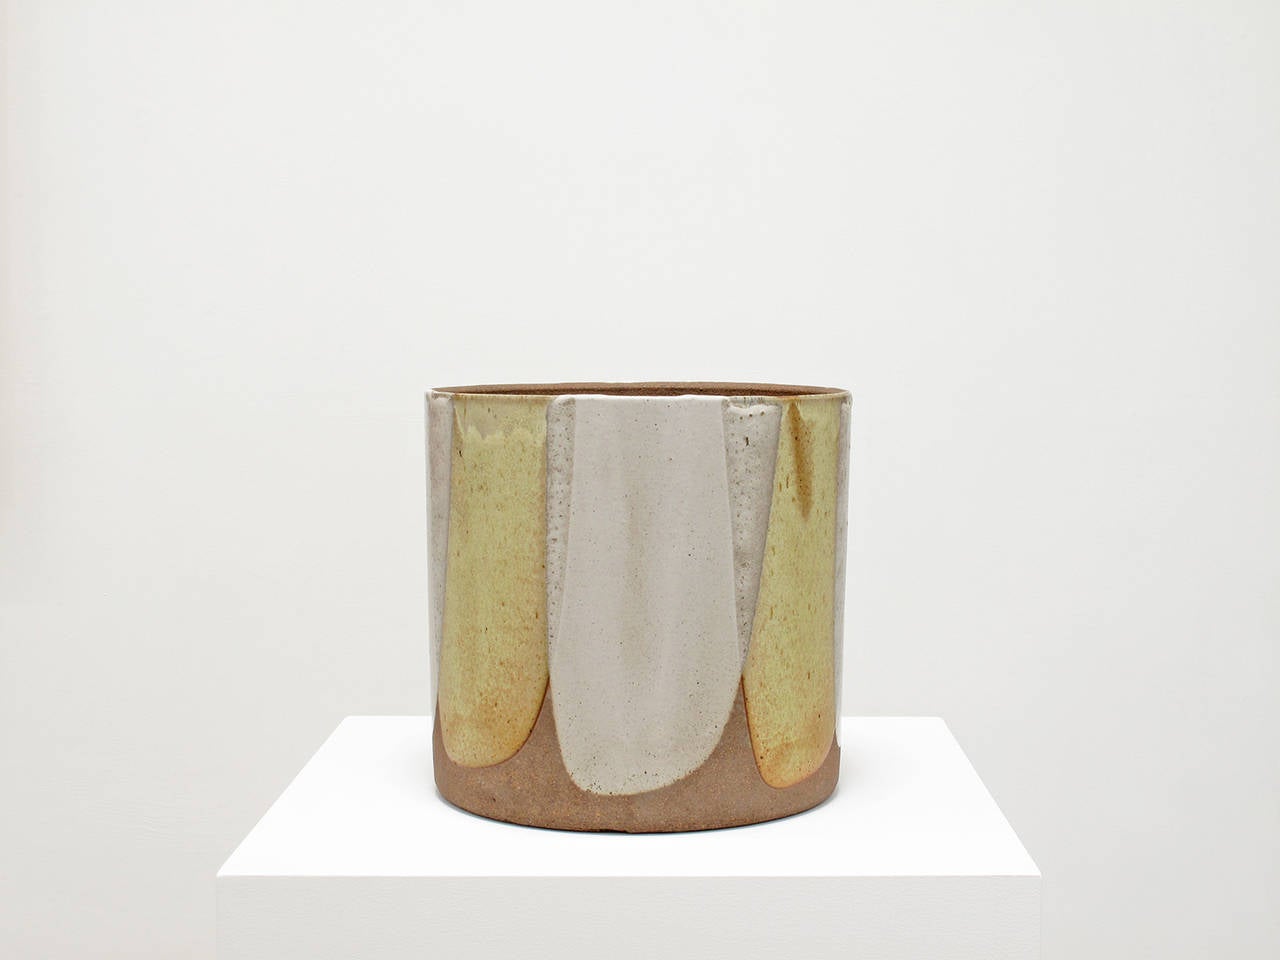 David Cressey
'Flame' design ceramic vessel
Stoneware, glazed stone white and sienna yellow
Pro Artisan Collection
Architectural Pottery
Los Angeles, California, 1960s
11.25 high x 12 dia inches